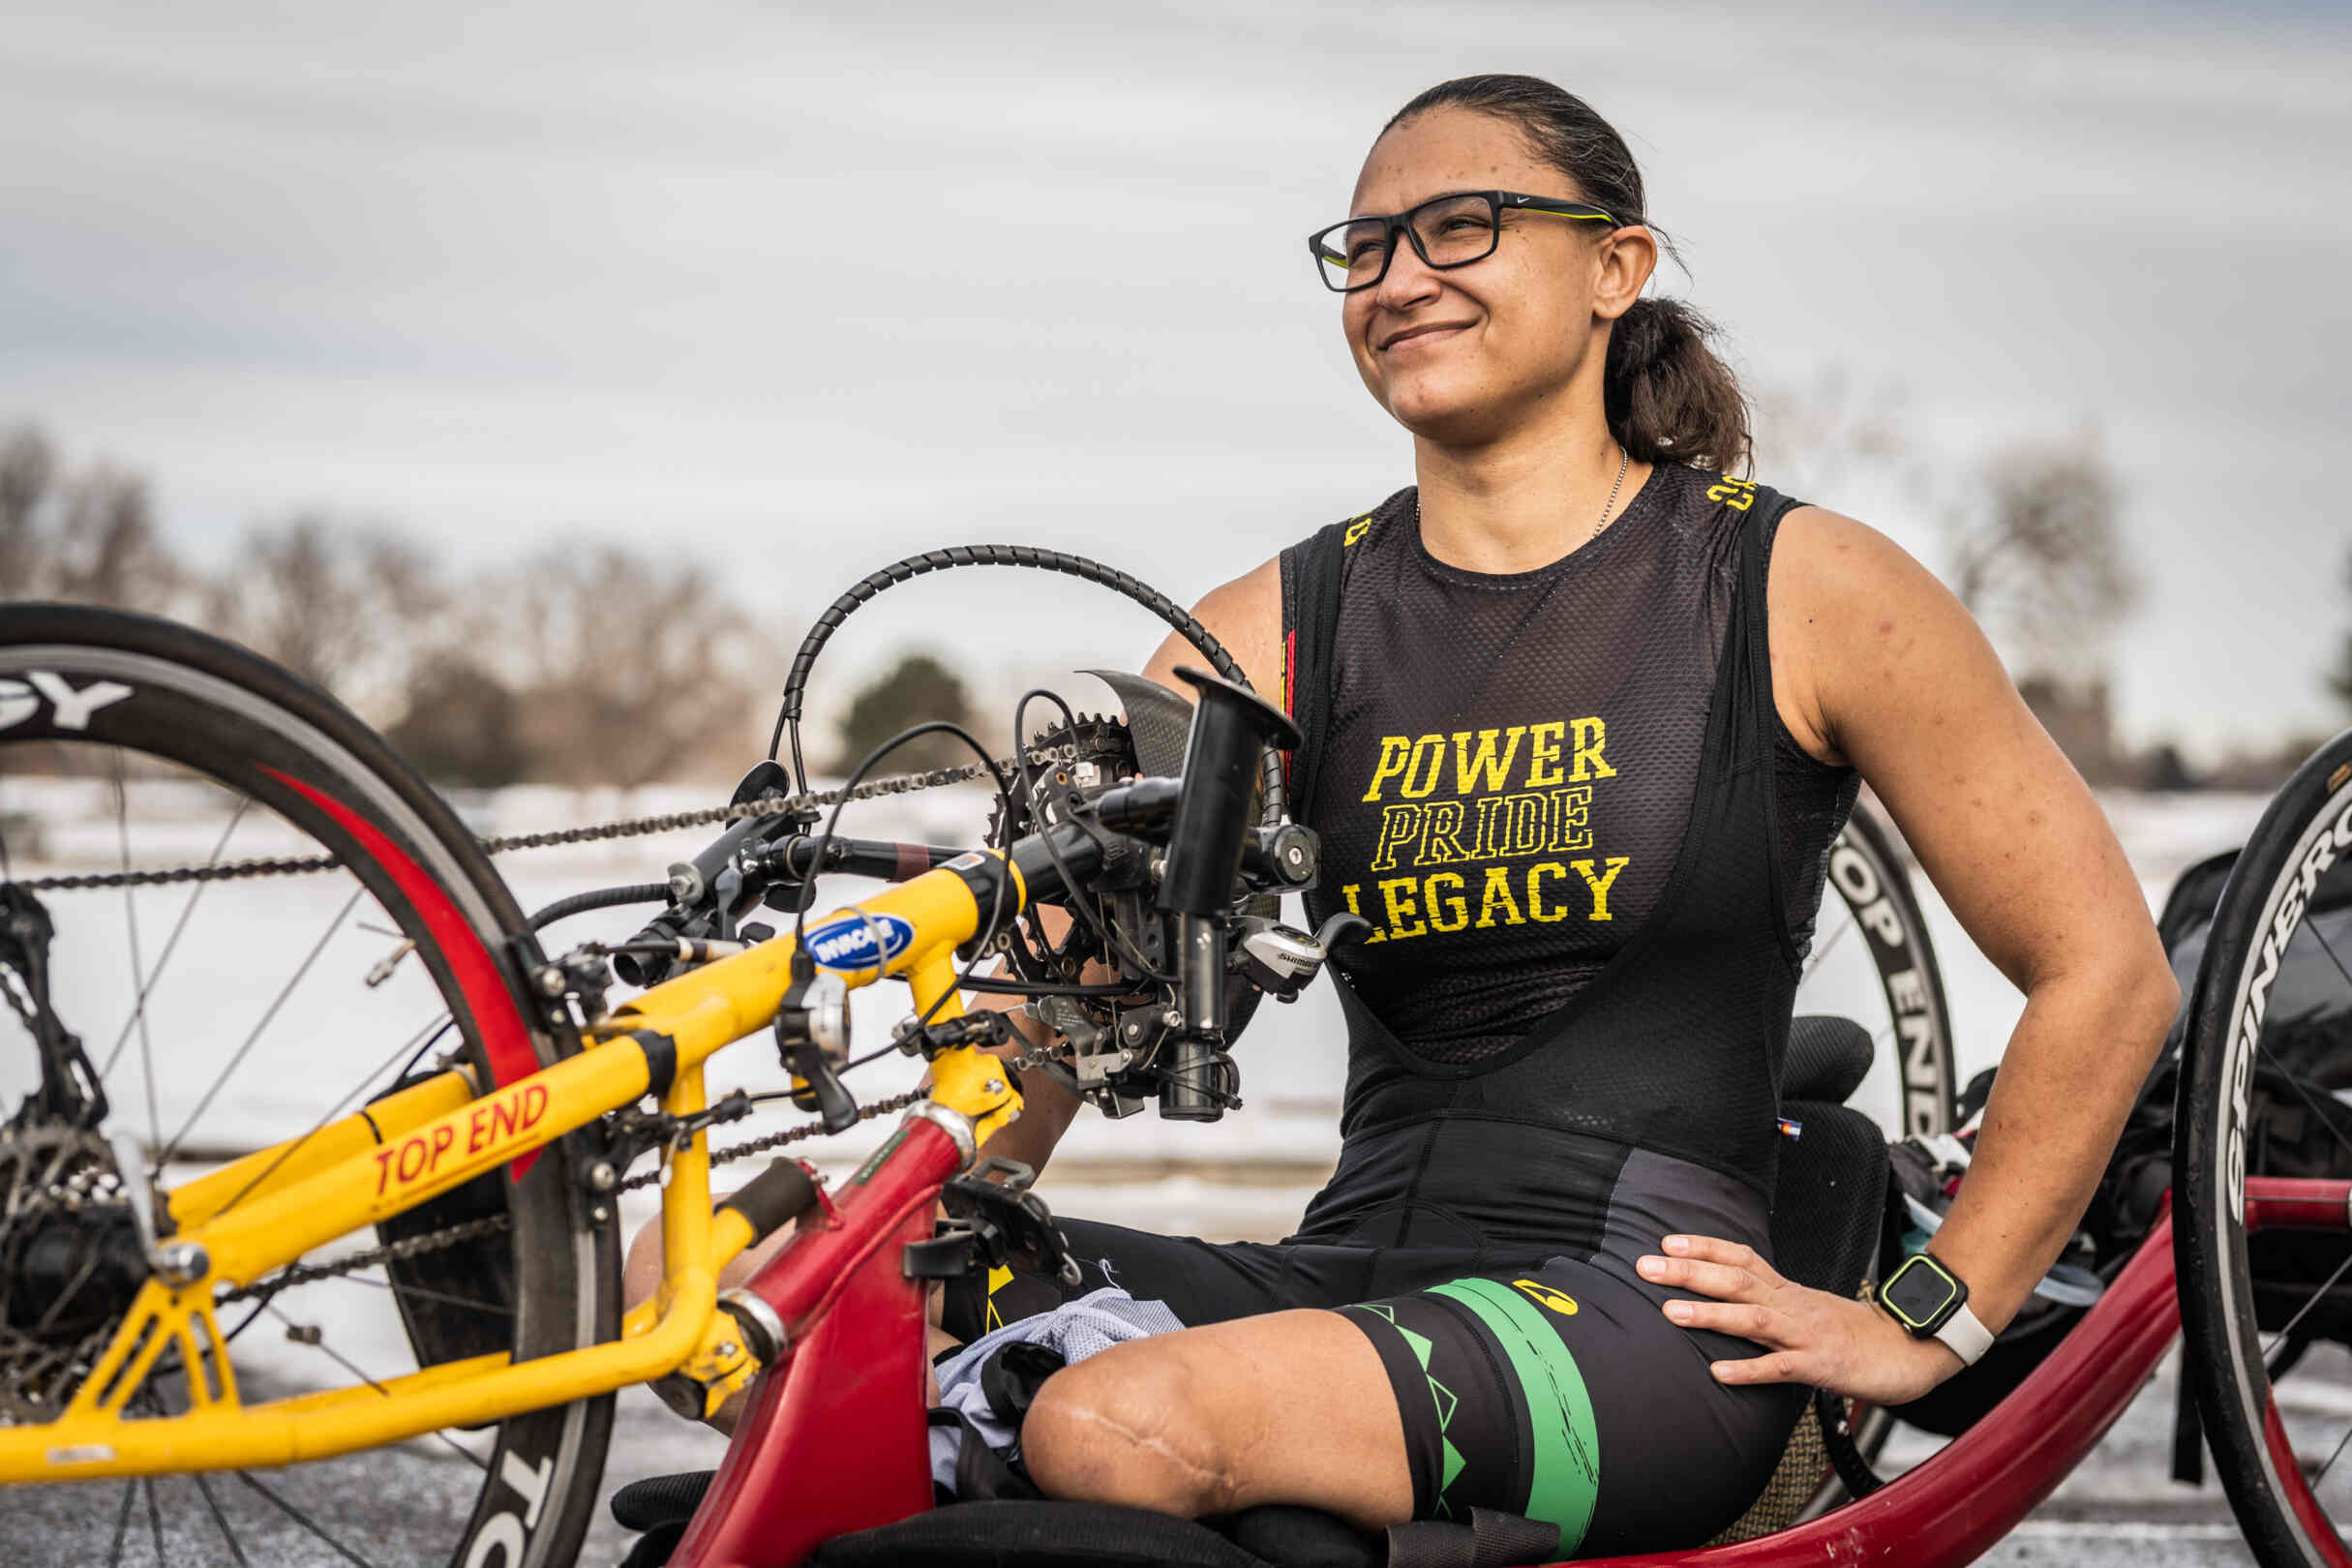 Inclusive Cycling Clothing Company for Men & Women - Indy freelance